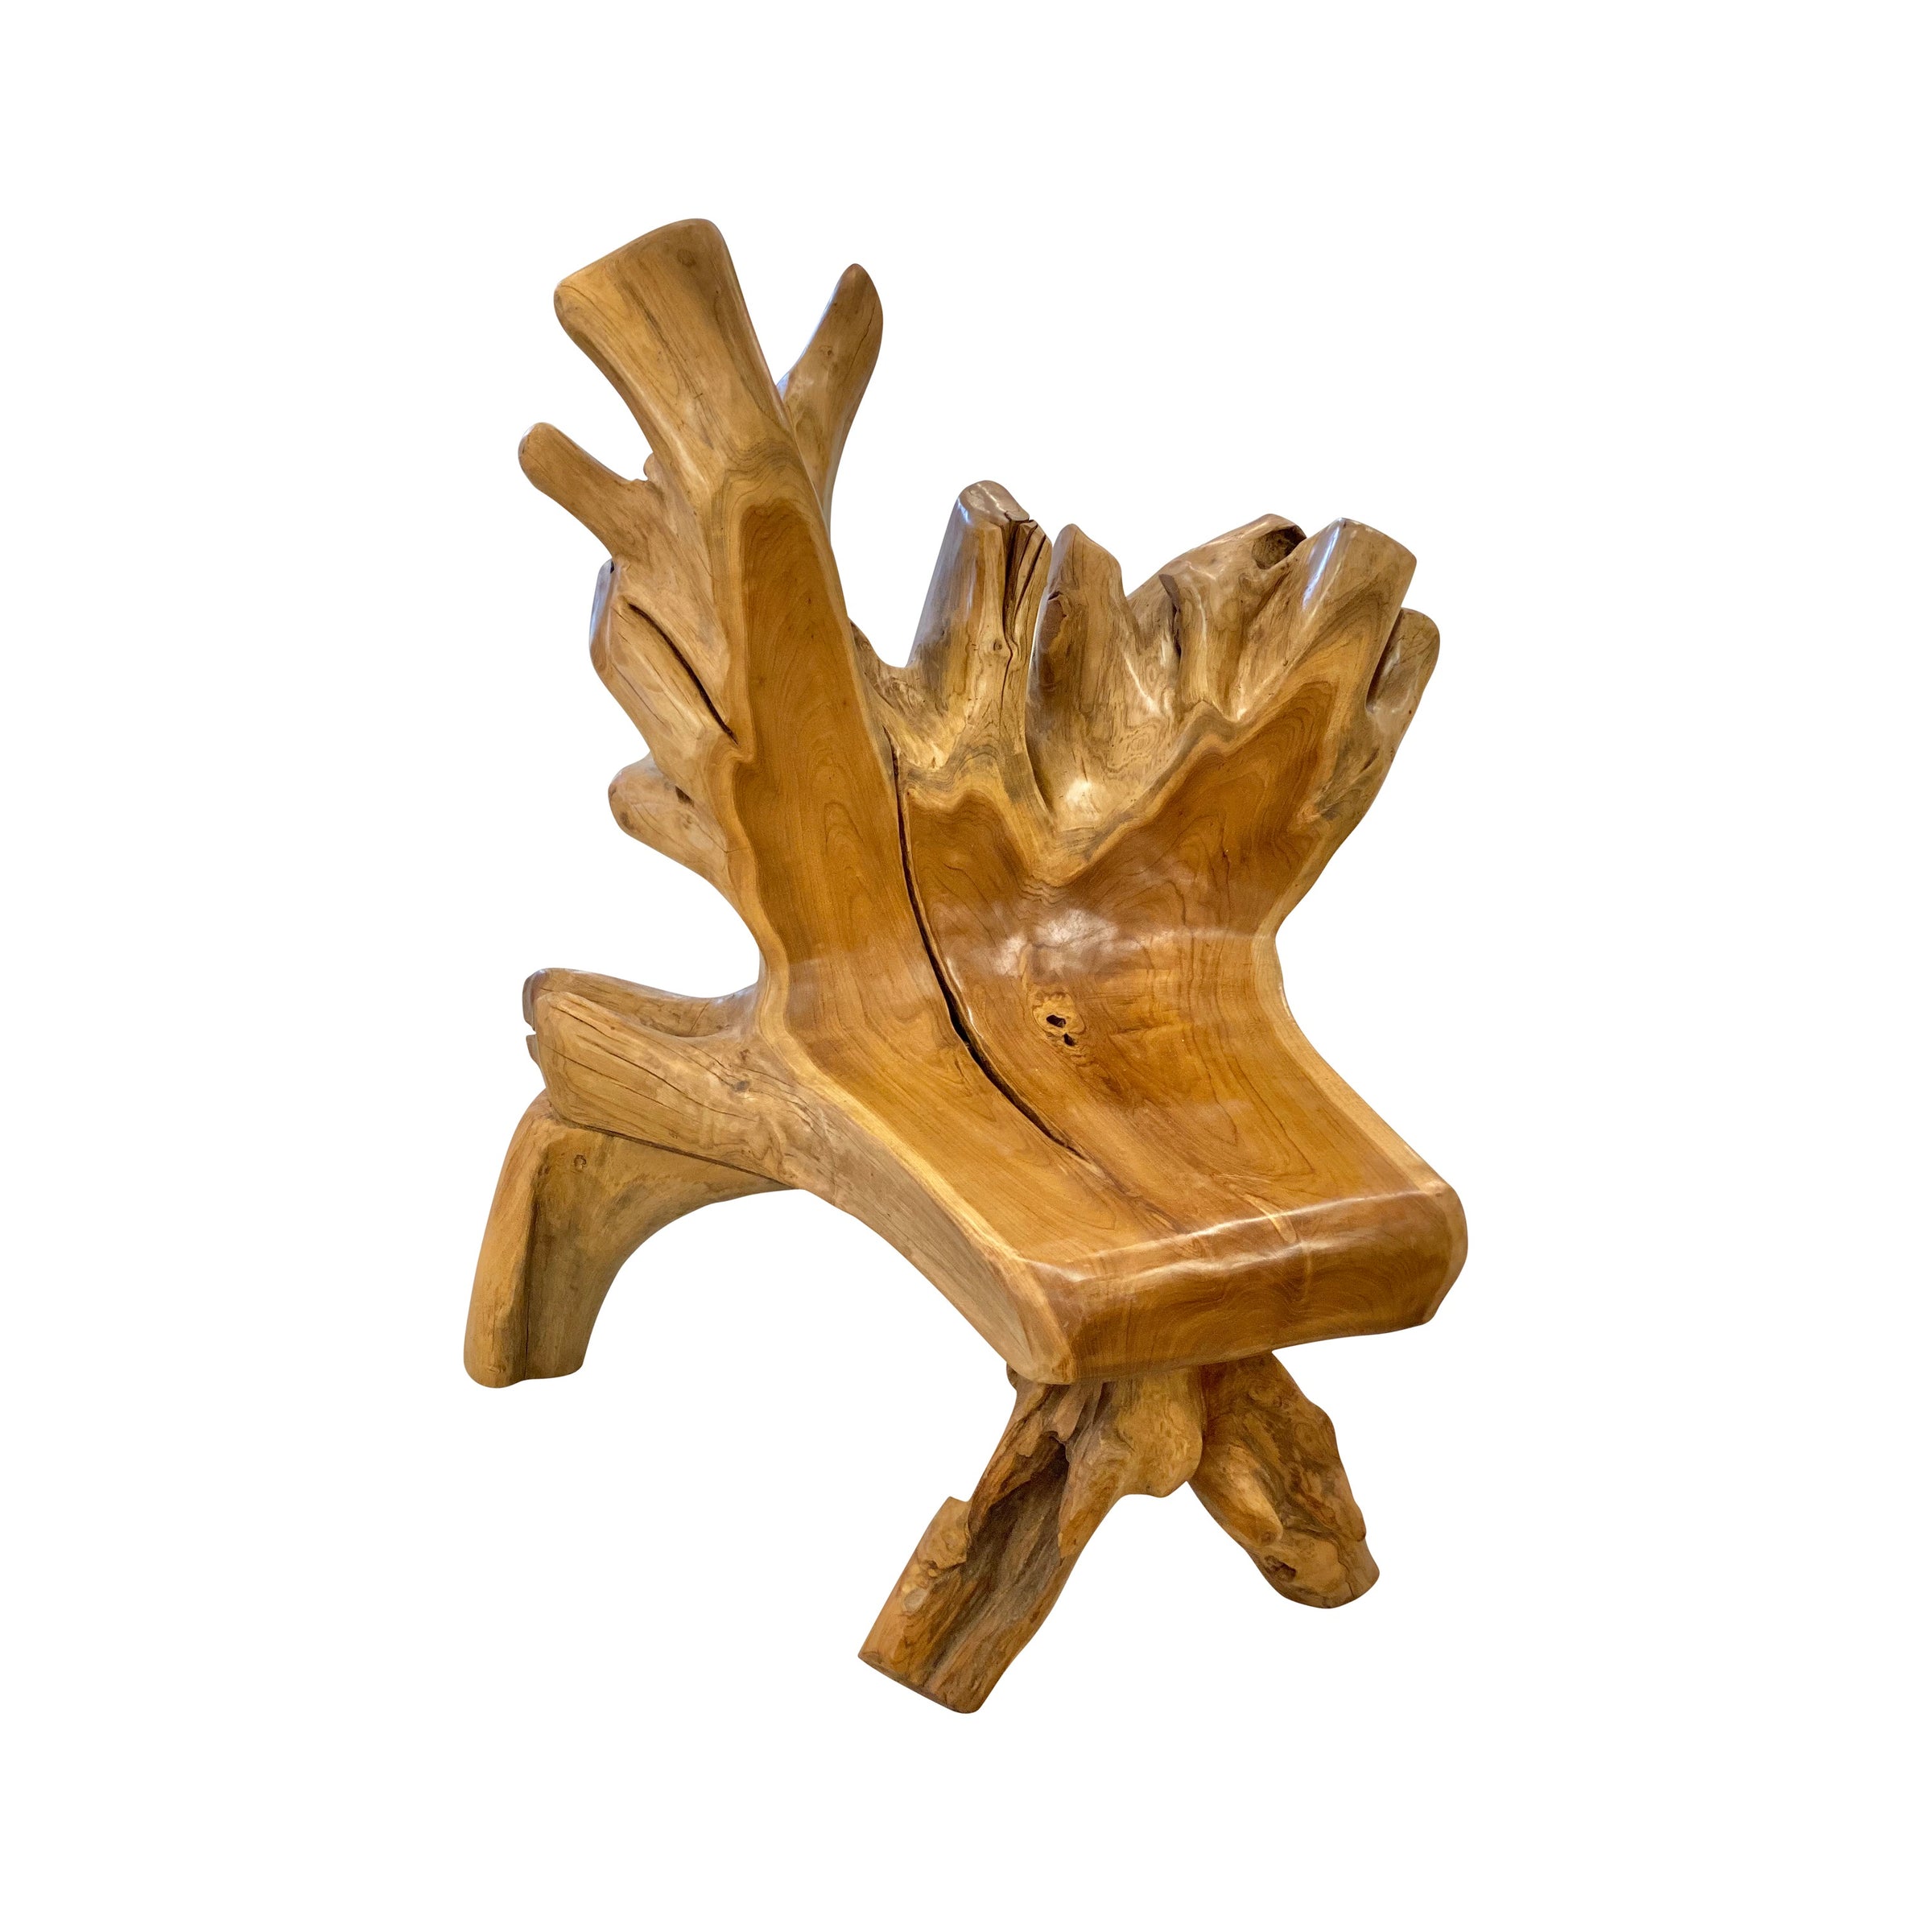 Natural Teak Seat from Bali - colletteconsignment.com